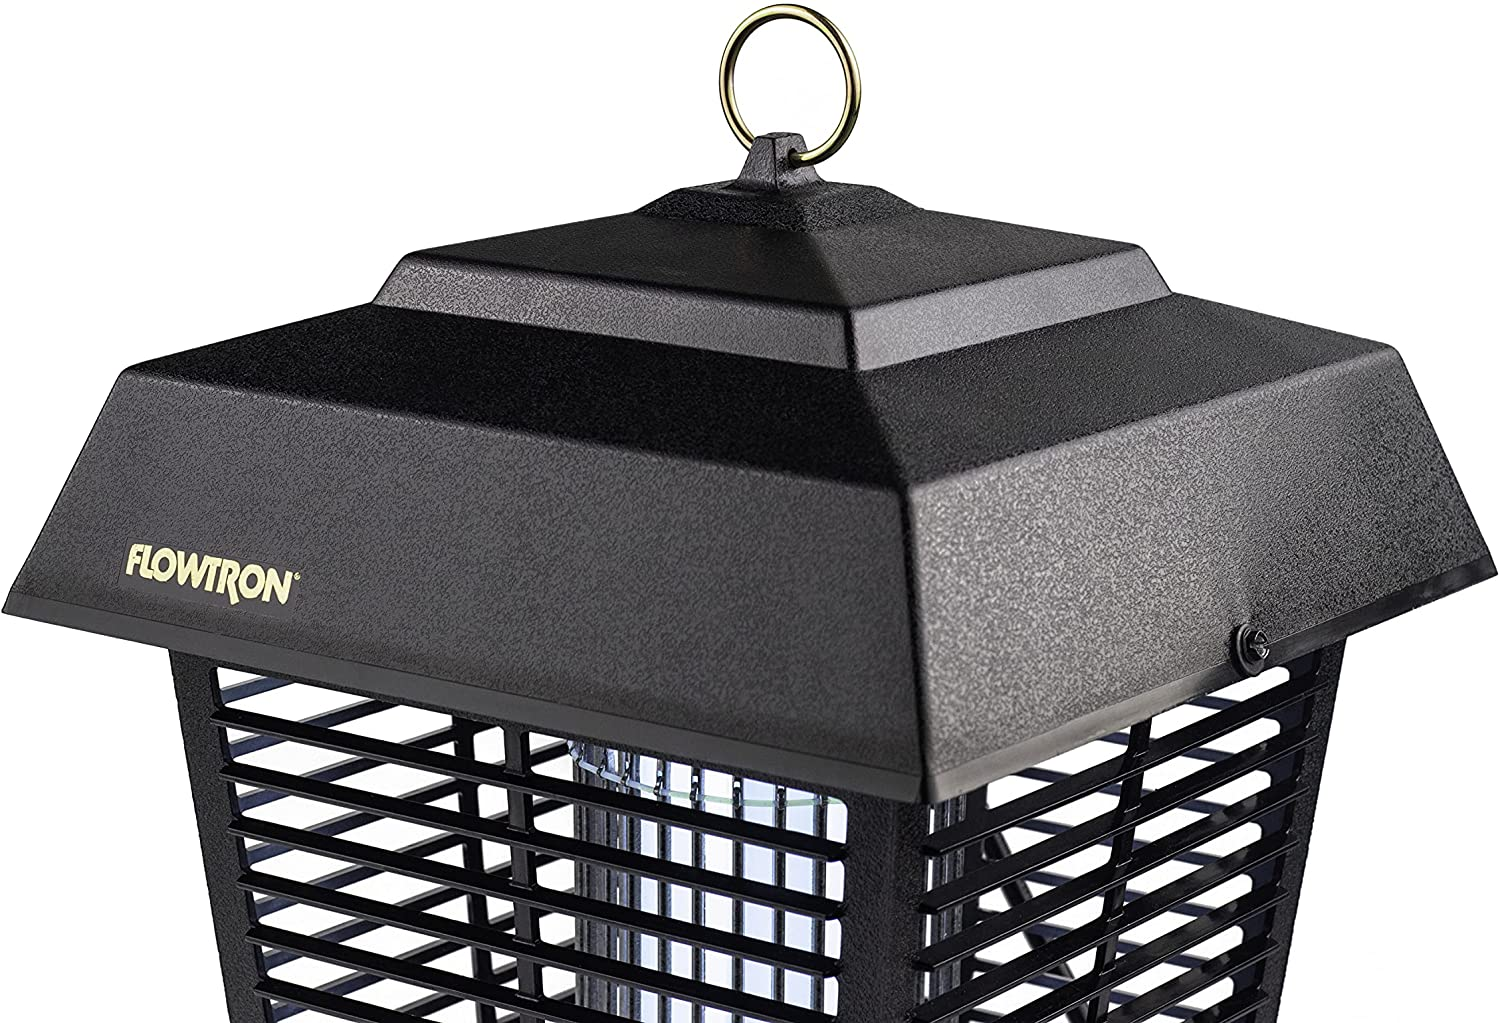 BK-40D Electronic Insect Killer, 1 Acre Coverage,Black